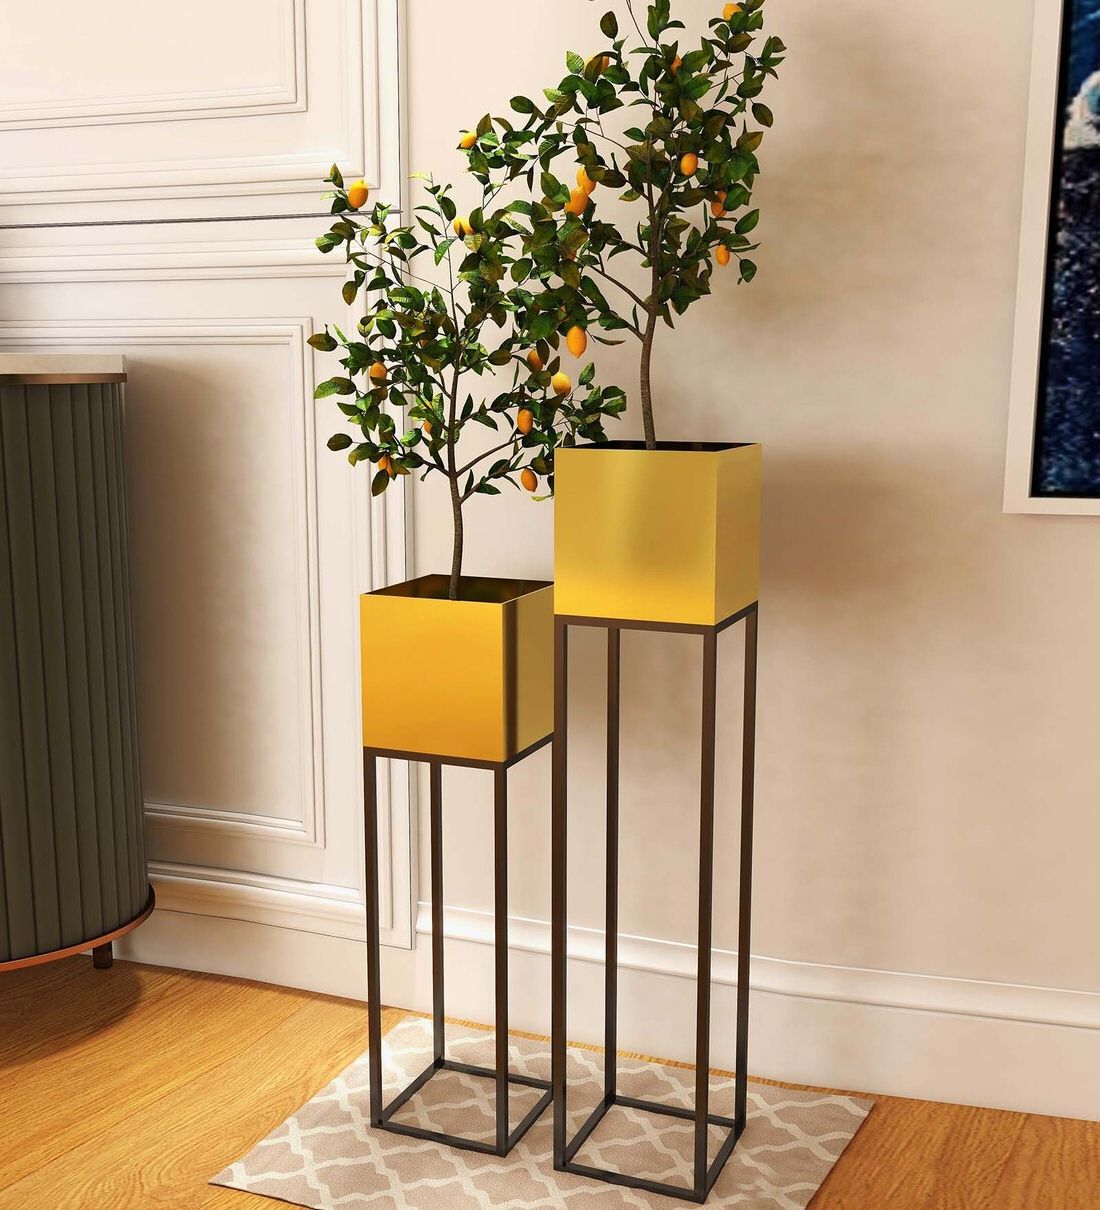 Buy Black & Gold Metal Rectangular Planter Stand, Set Of 2havanto  Online – Metal Planter Stands – Pots & Planters – Home Decor – Pepperfry  Product Pertaining To Favorite Rectangular Plant Stands (View 9 of 15)